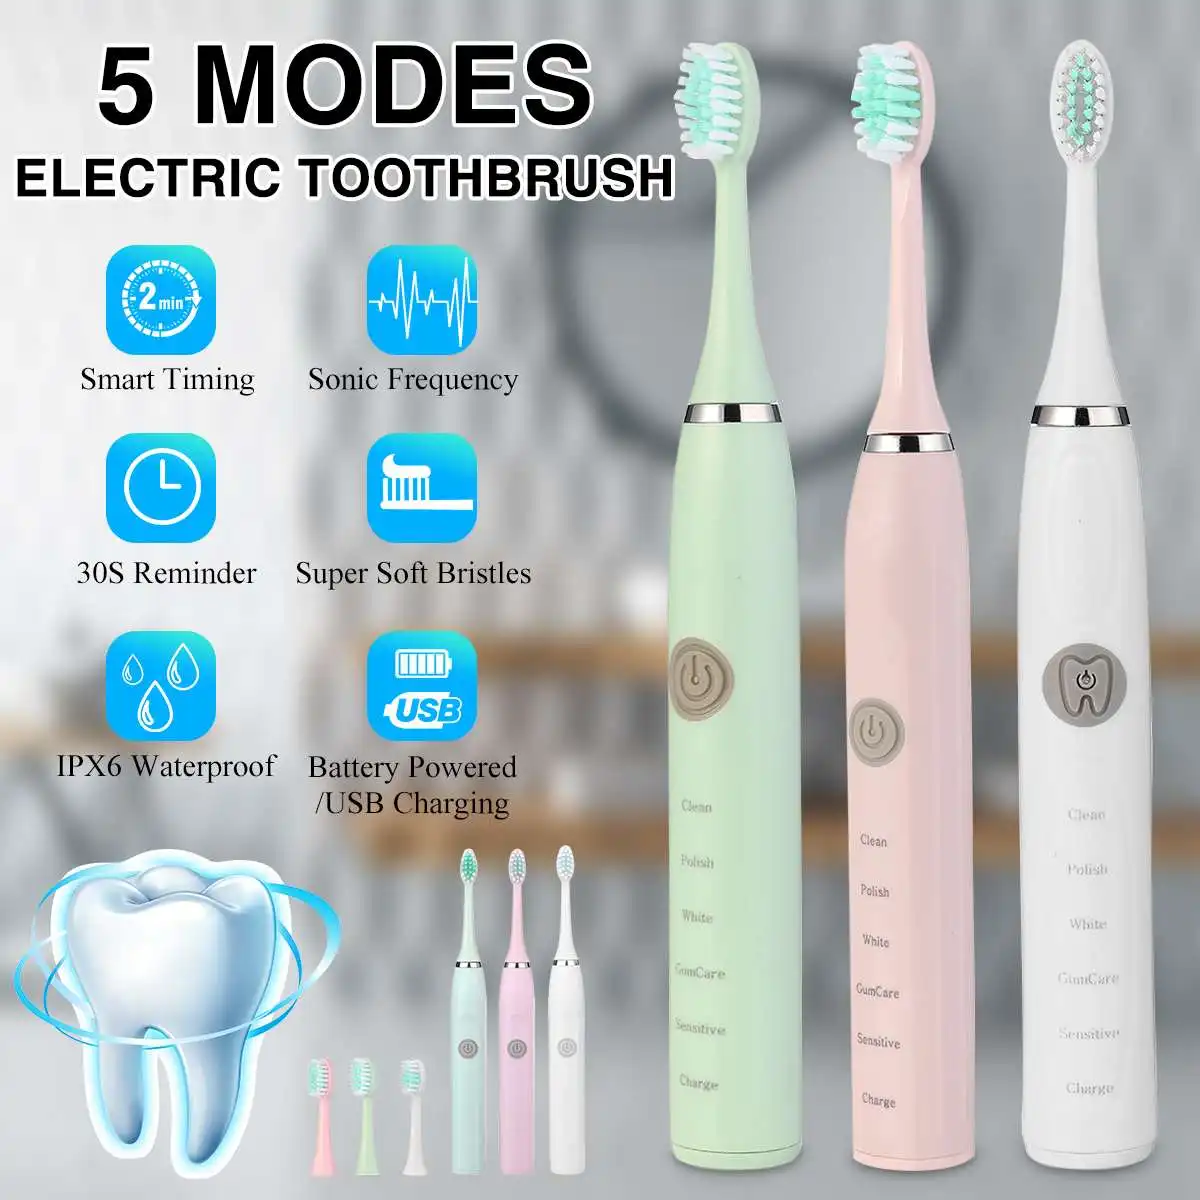 5 Modes Sonic Electric Toothbrush IPX6 Waterproof Automatic Children Cleaning Toothbrush Battery Powered/USB Charging